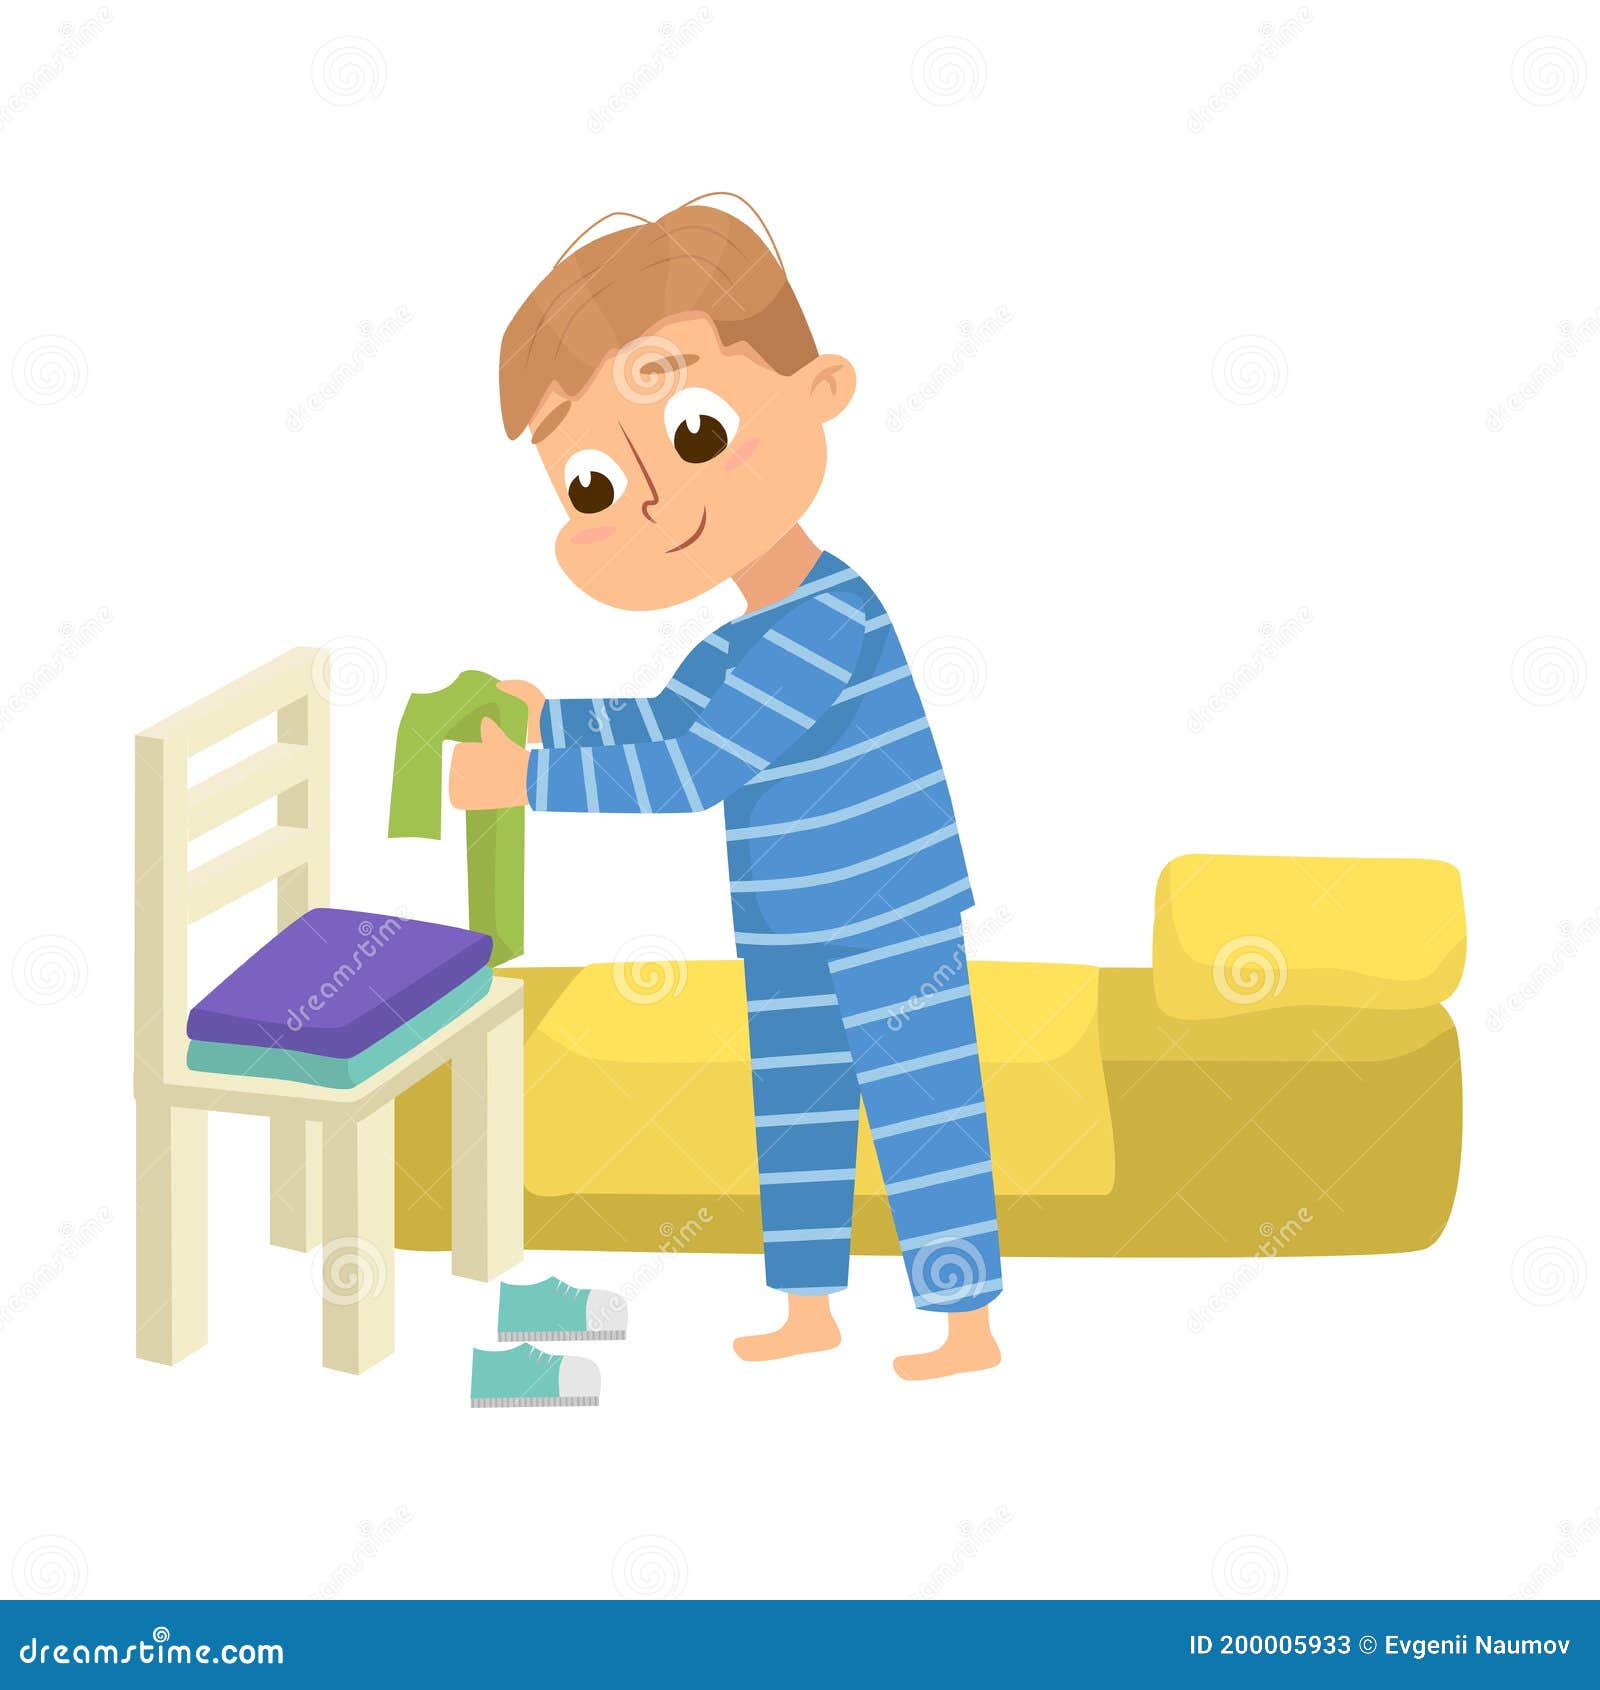 35 Getting Ready Bed Stock Illustrations Vectors Clipart